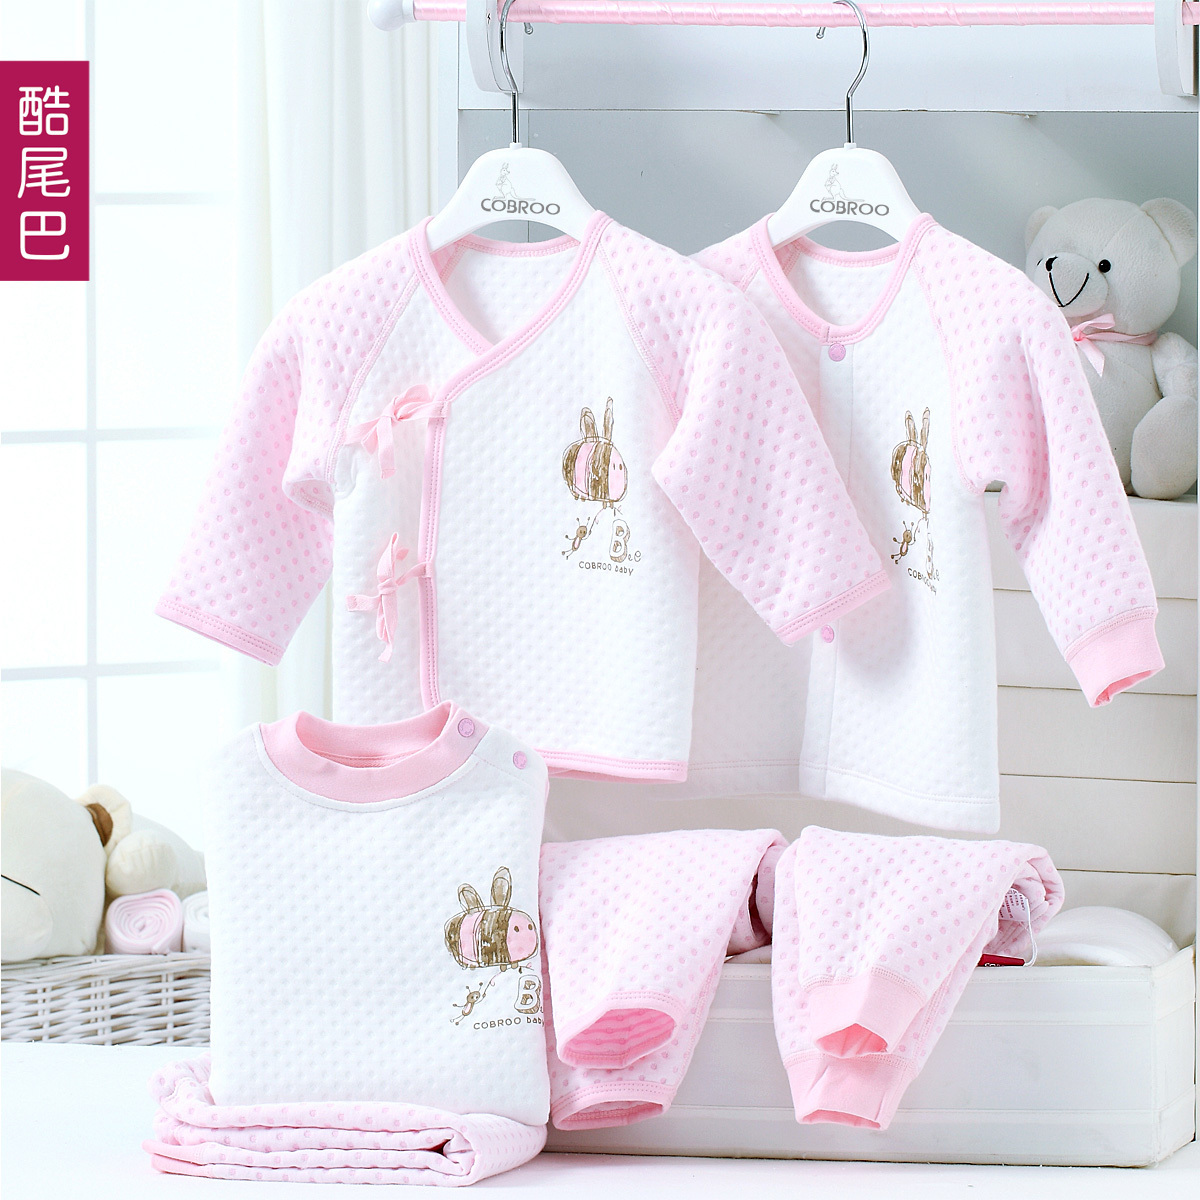 Pajamas Child newborn thickening thermal clothes sleep set male child long johns autumn and winter